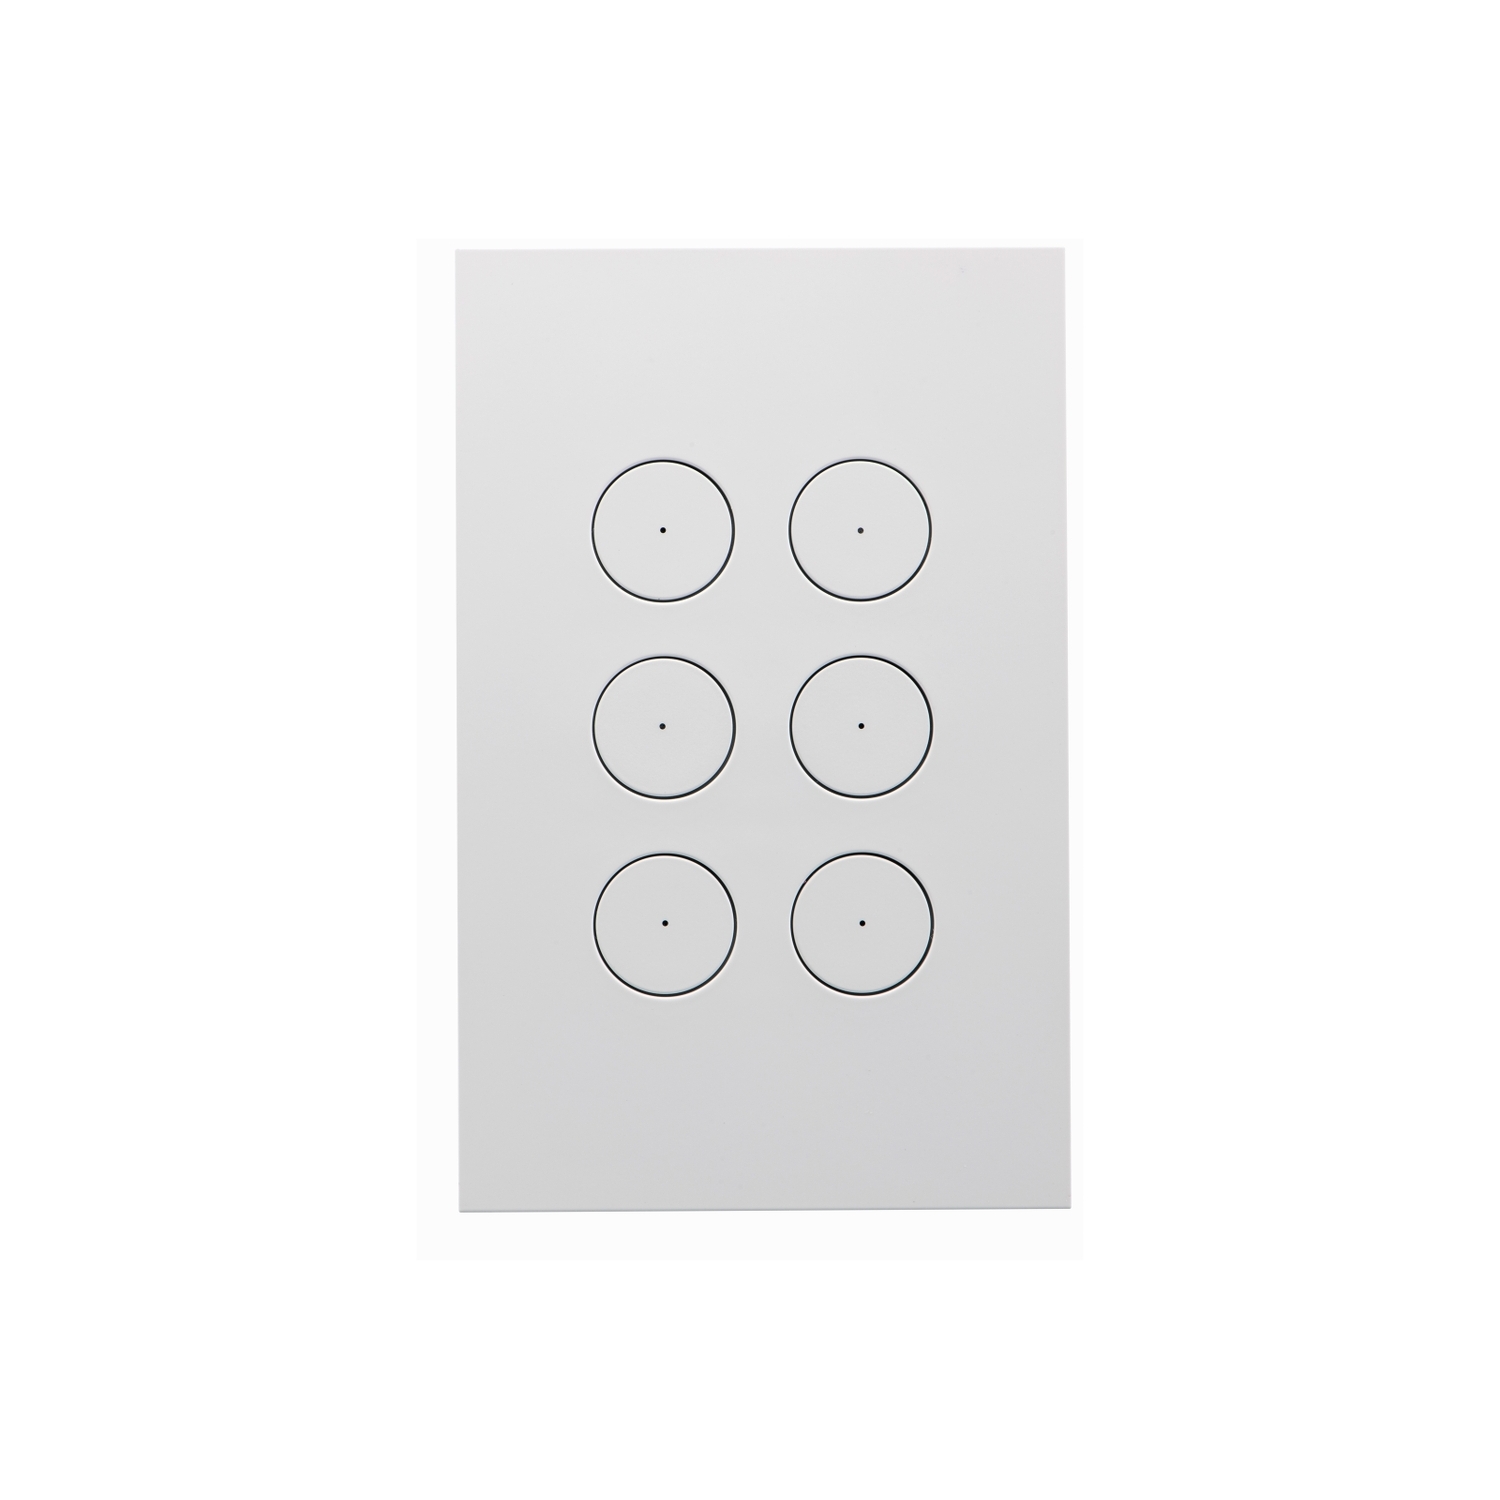 Clipsal Grid Plate and Cover Switch Saturn Zen - Less mechanism - 6-gang - Choose Colour